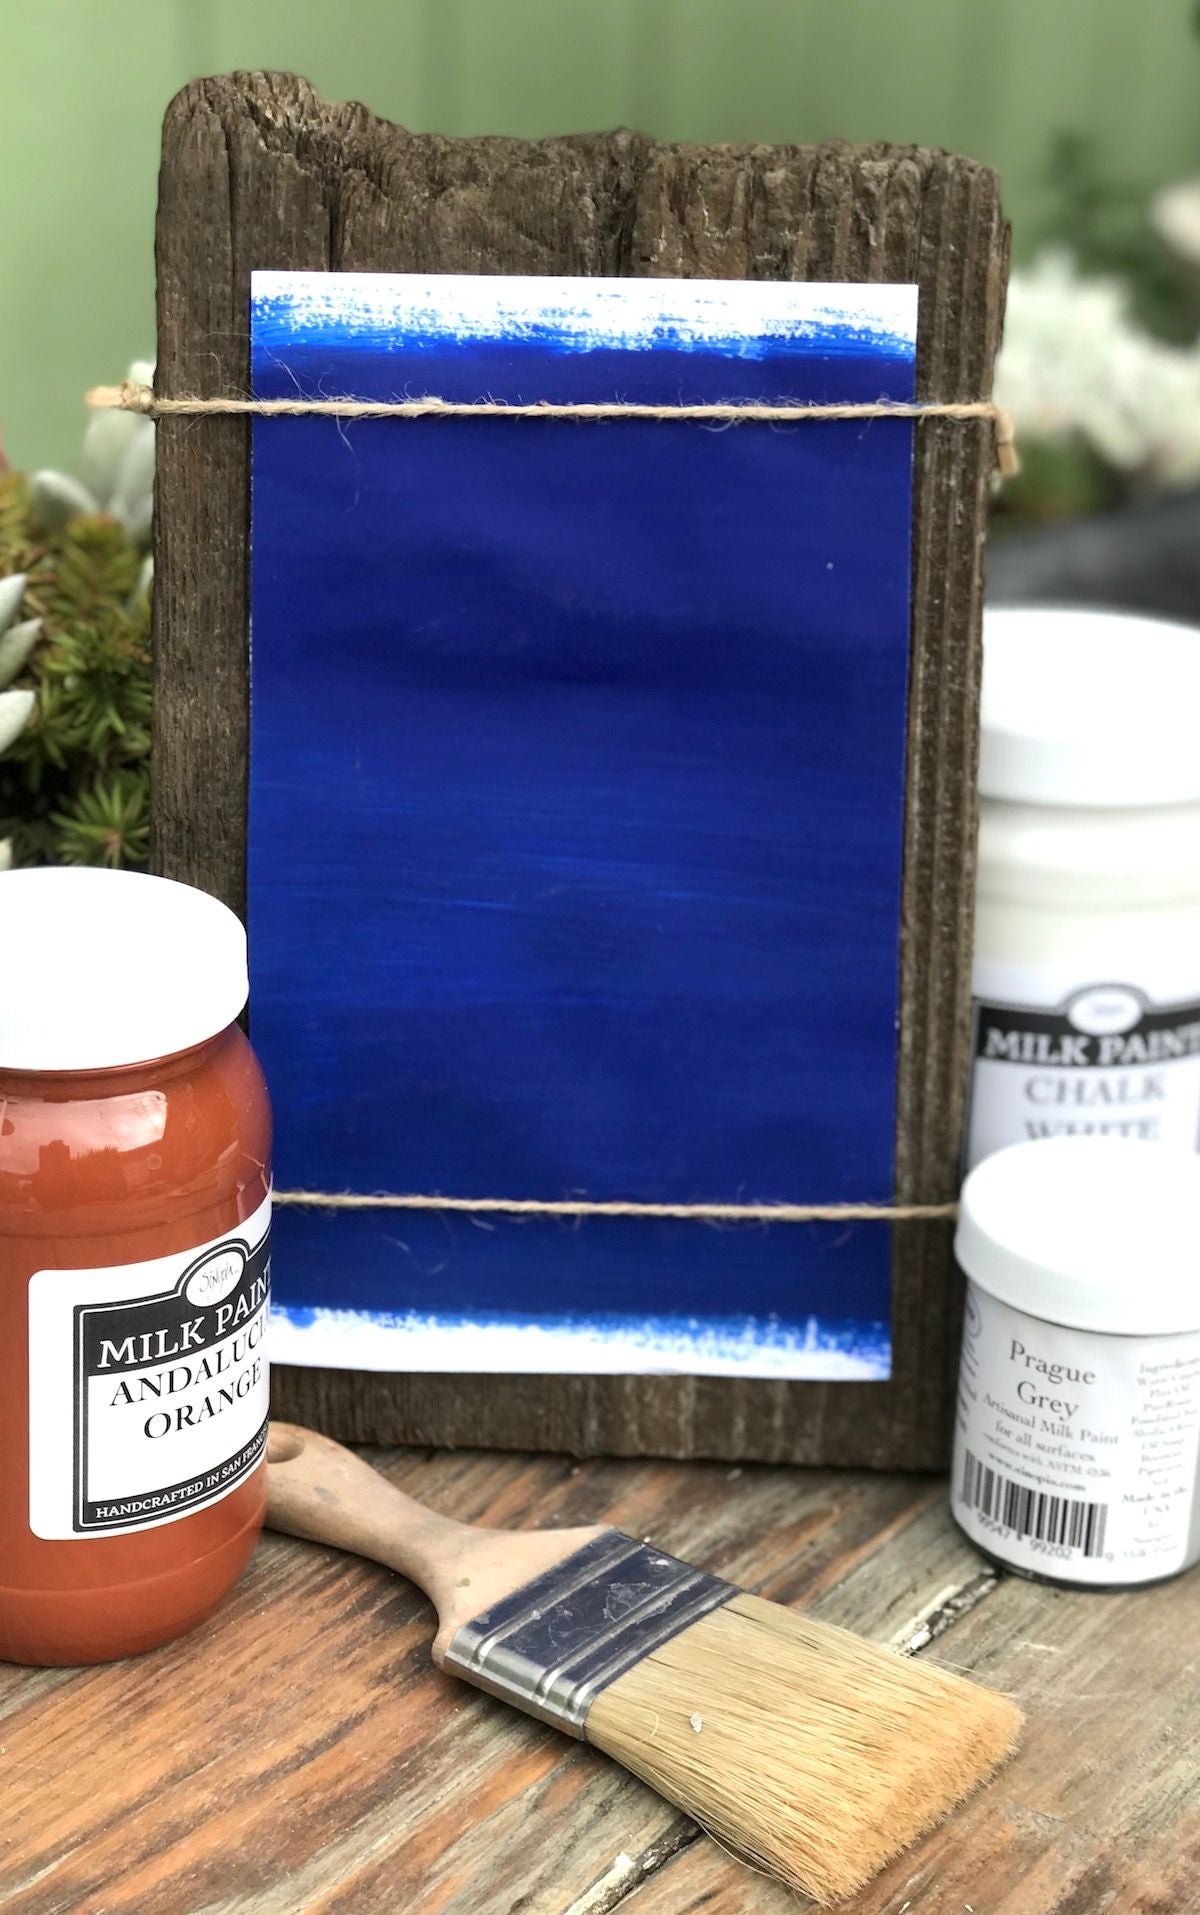 Milk Paint Marrakesh Azure is available at Natural Art Supplies